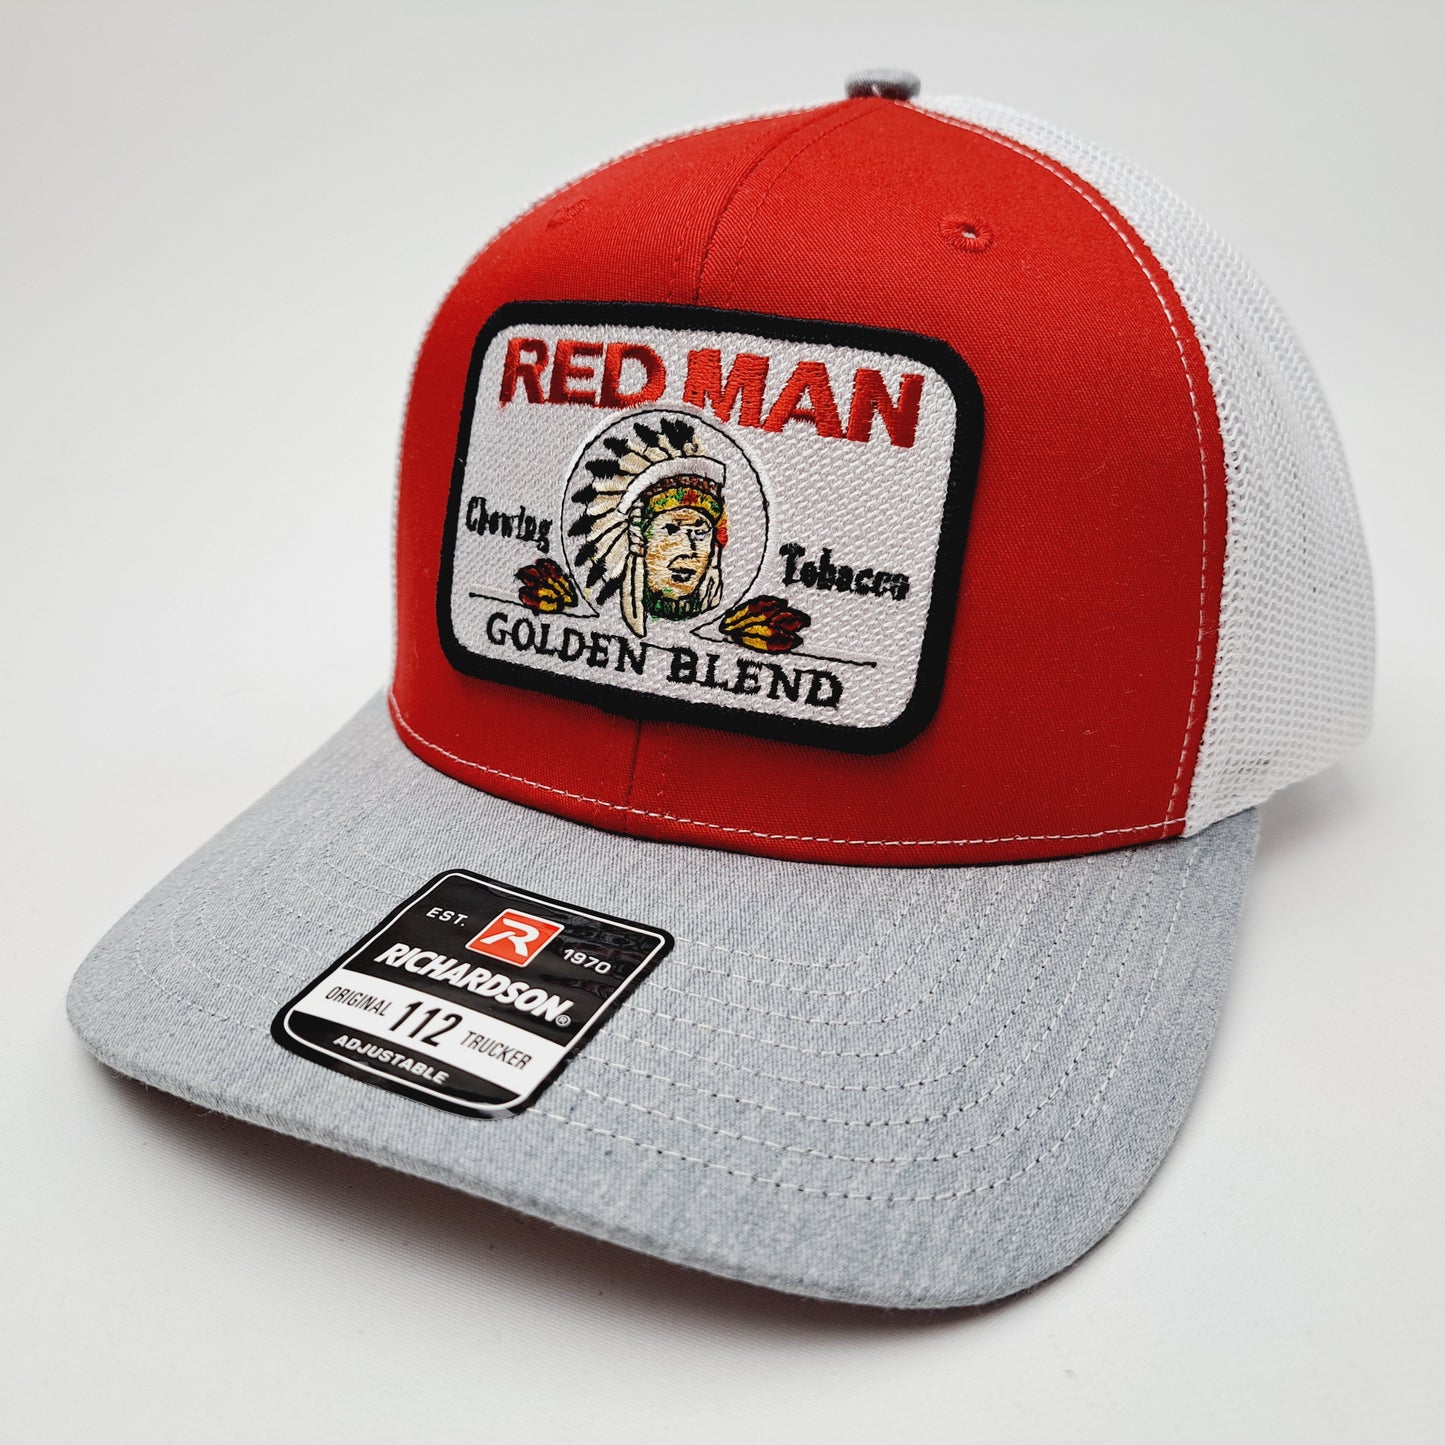 Red Man Embroidered Patch Richardson 112 Trucker Mesh Snapback Cap Hat Red & White